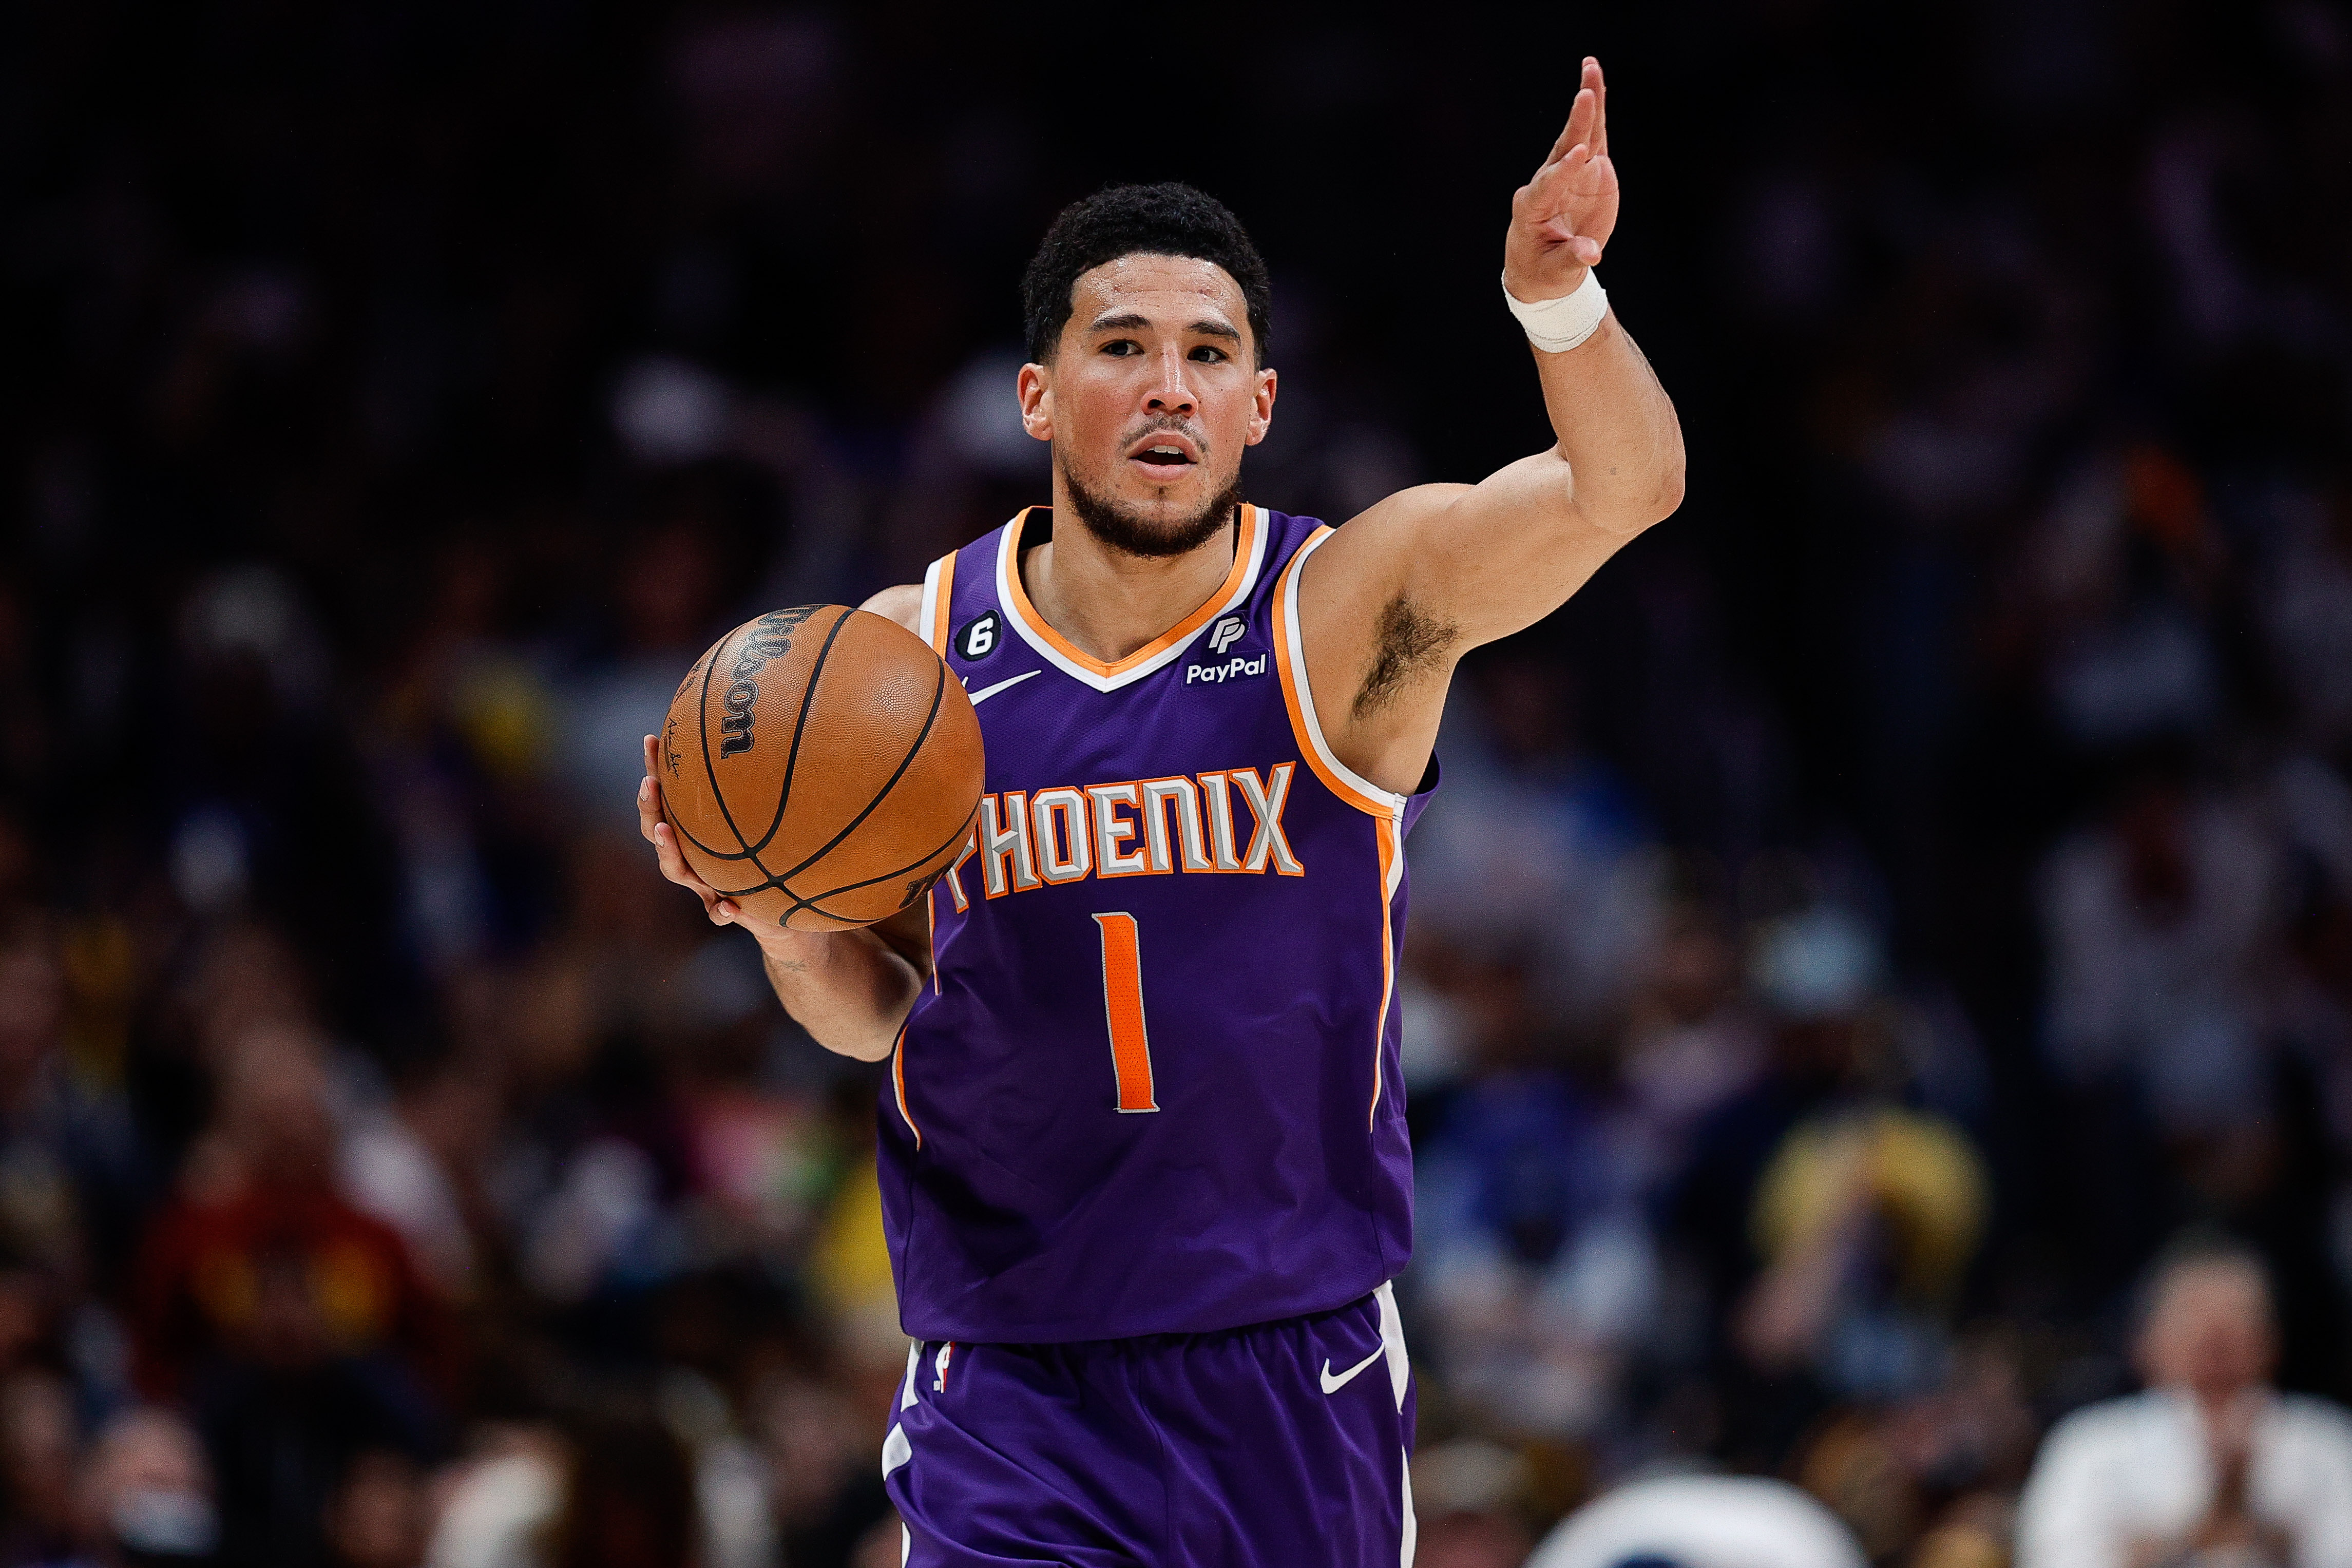 The Best NBA Player With Every Jersey Number For The 2022-23 Season -  Fadeaway World